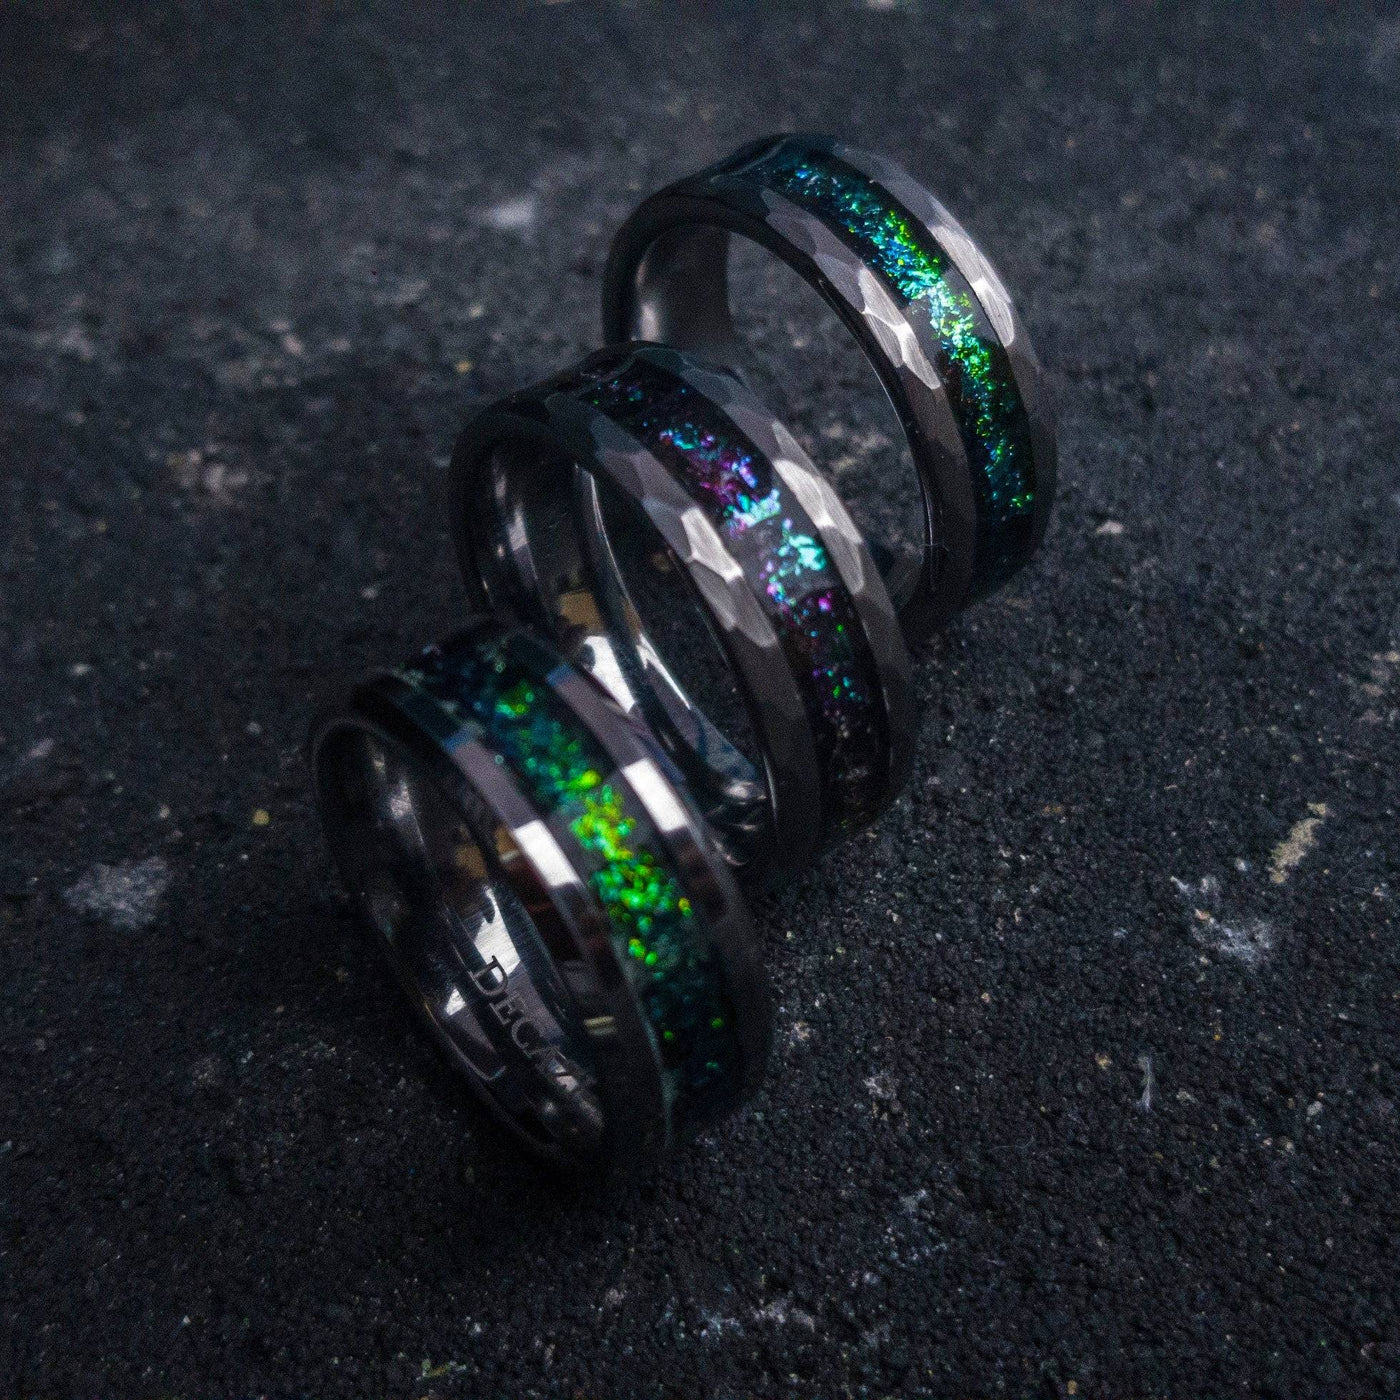 Tungsten ring with green chameleon flakes